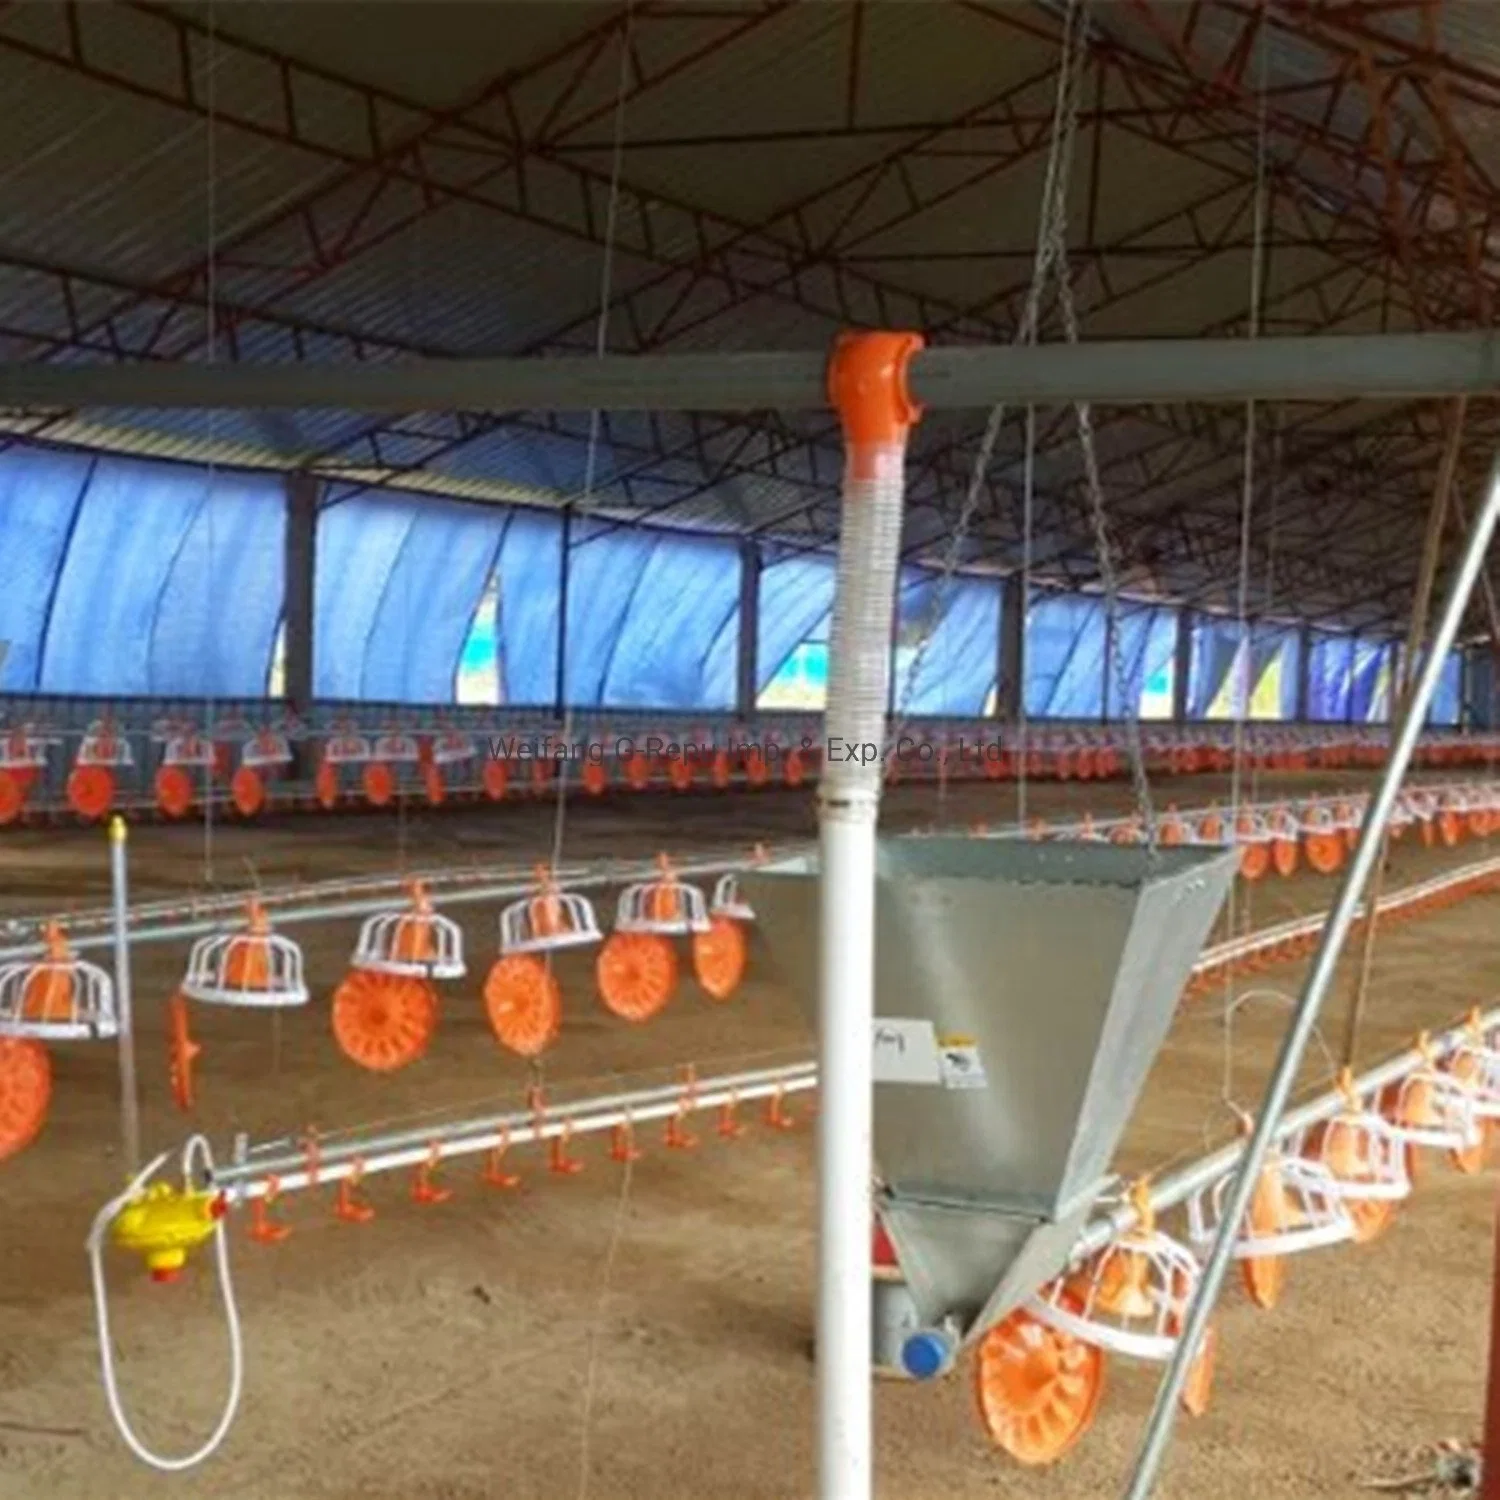 Automatic Feeder Pan Feeding System for Broiler Chicken in Poultry Farm Equipment